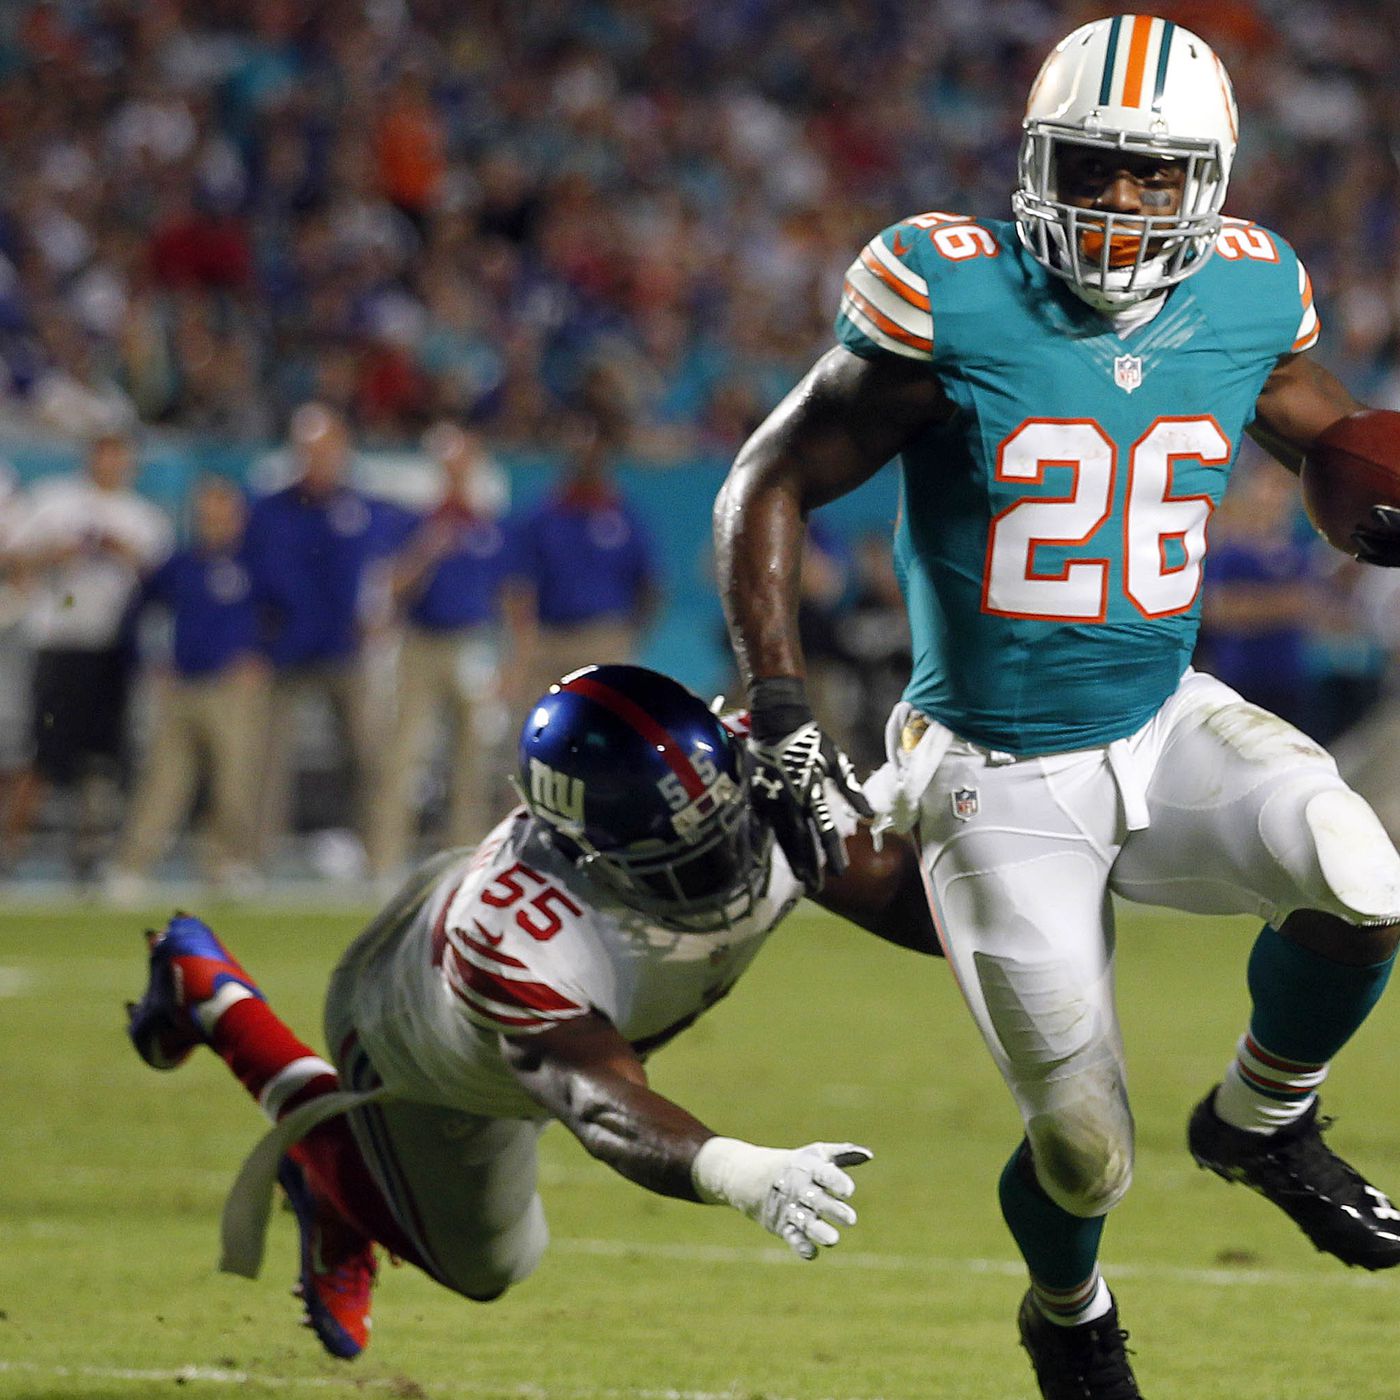 Lamar Miller to sign a 4-year, $26 million deal with the Texans ...